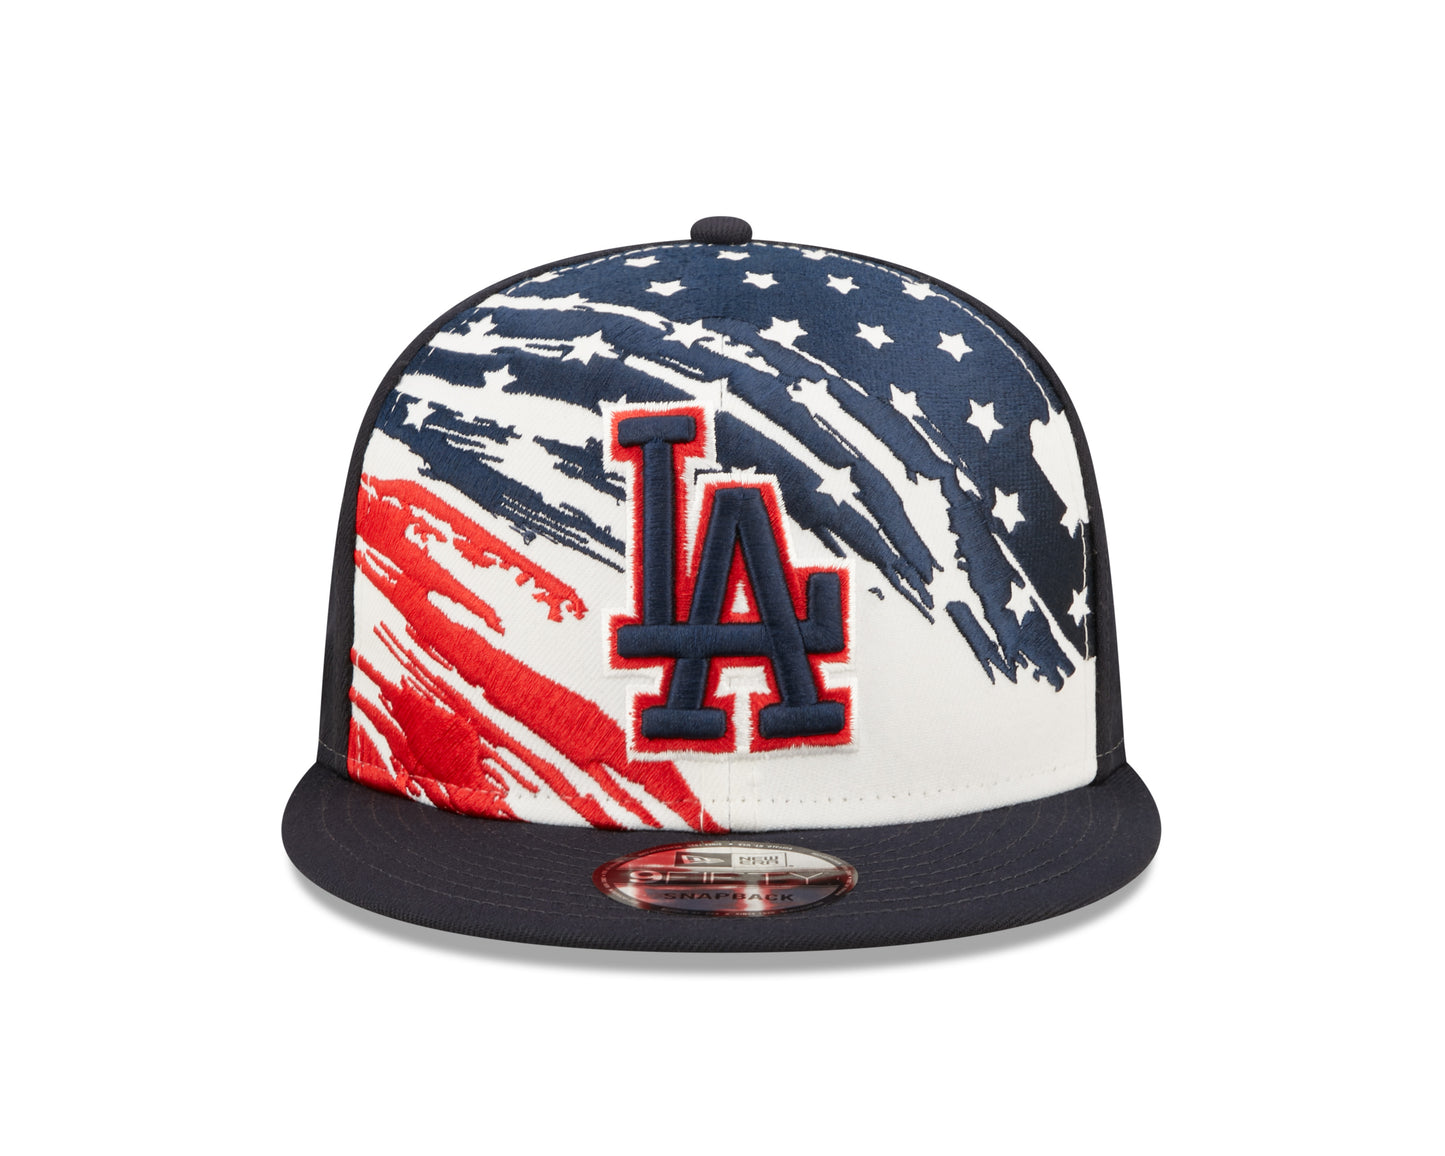 Los Angeles Dodgers Stars and Stripes July 4th 59fifty Fitted Hats